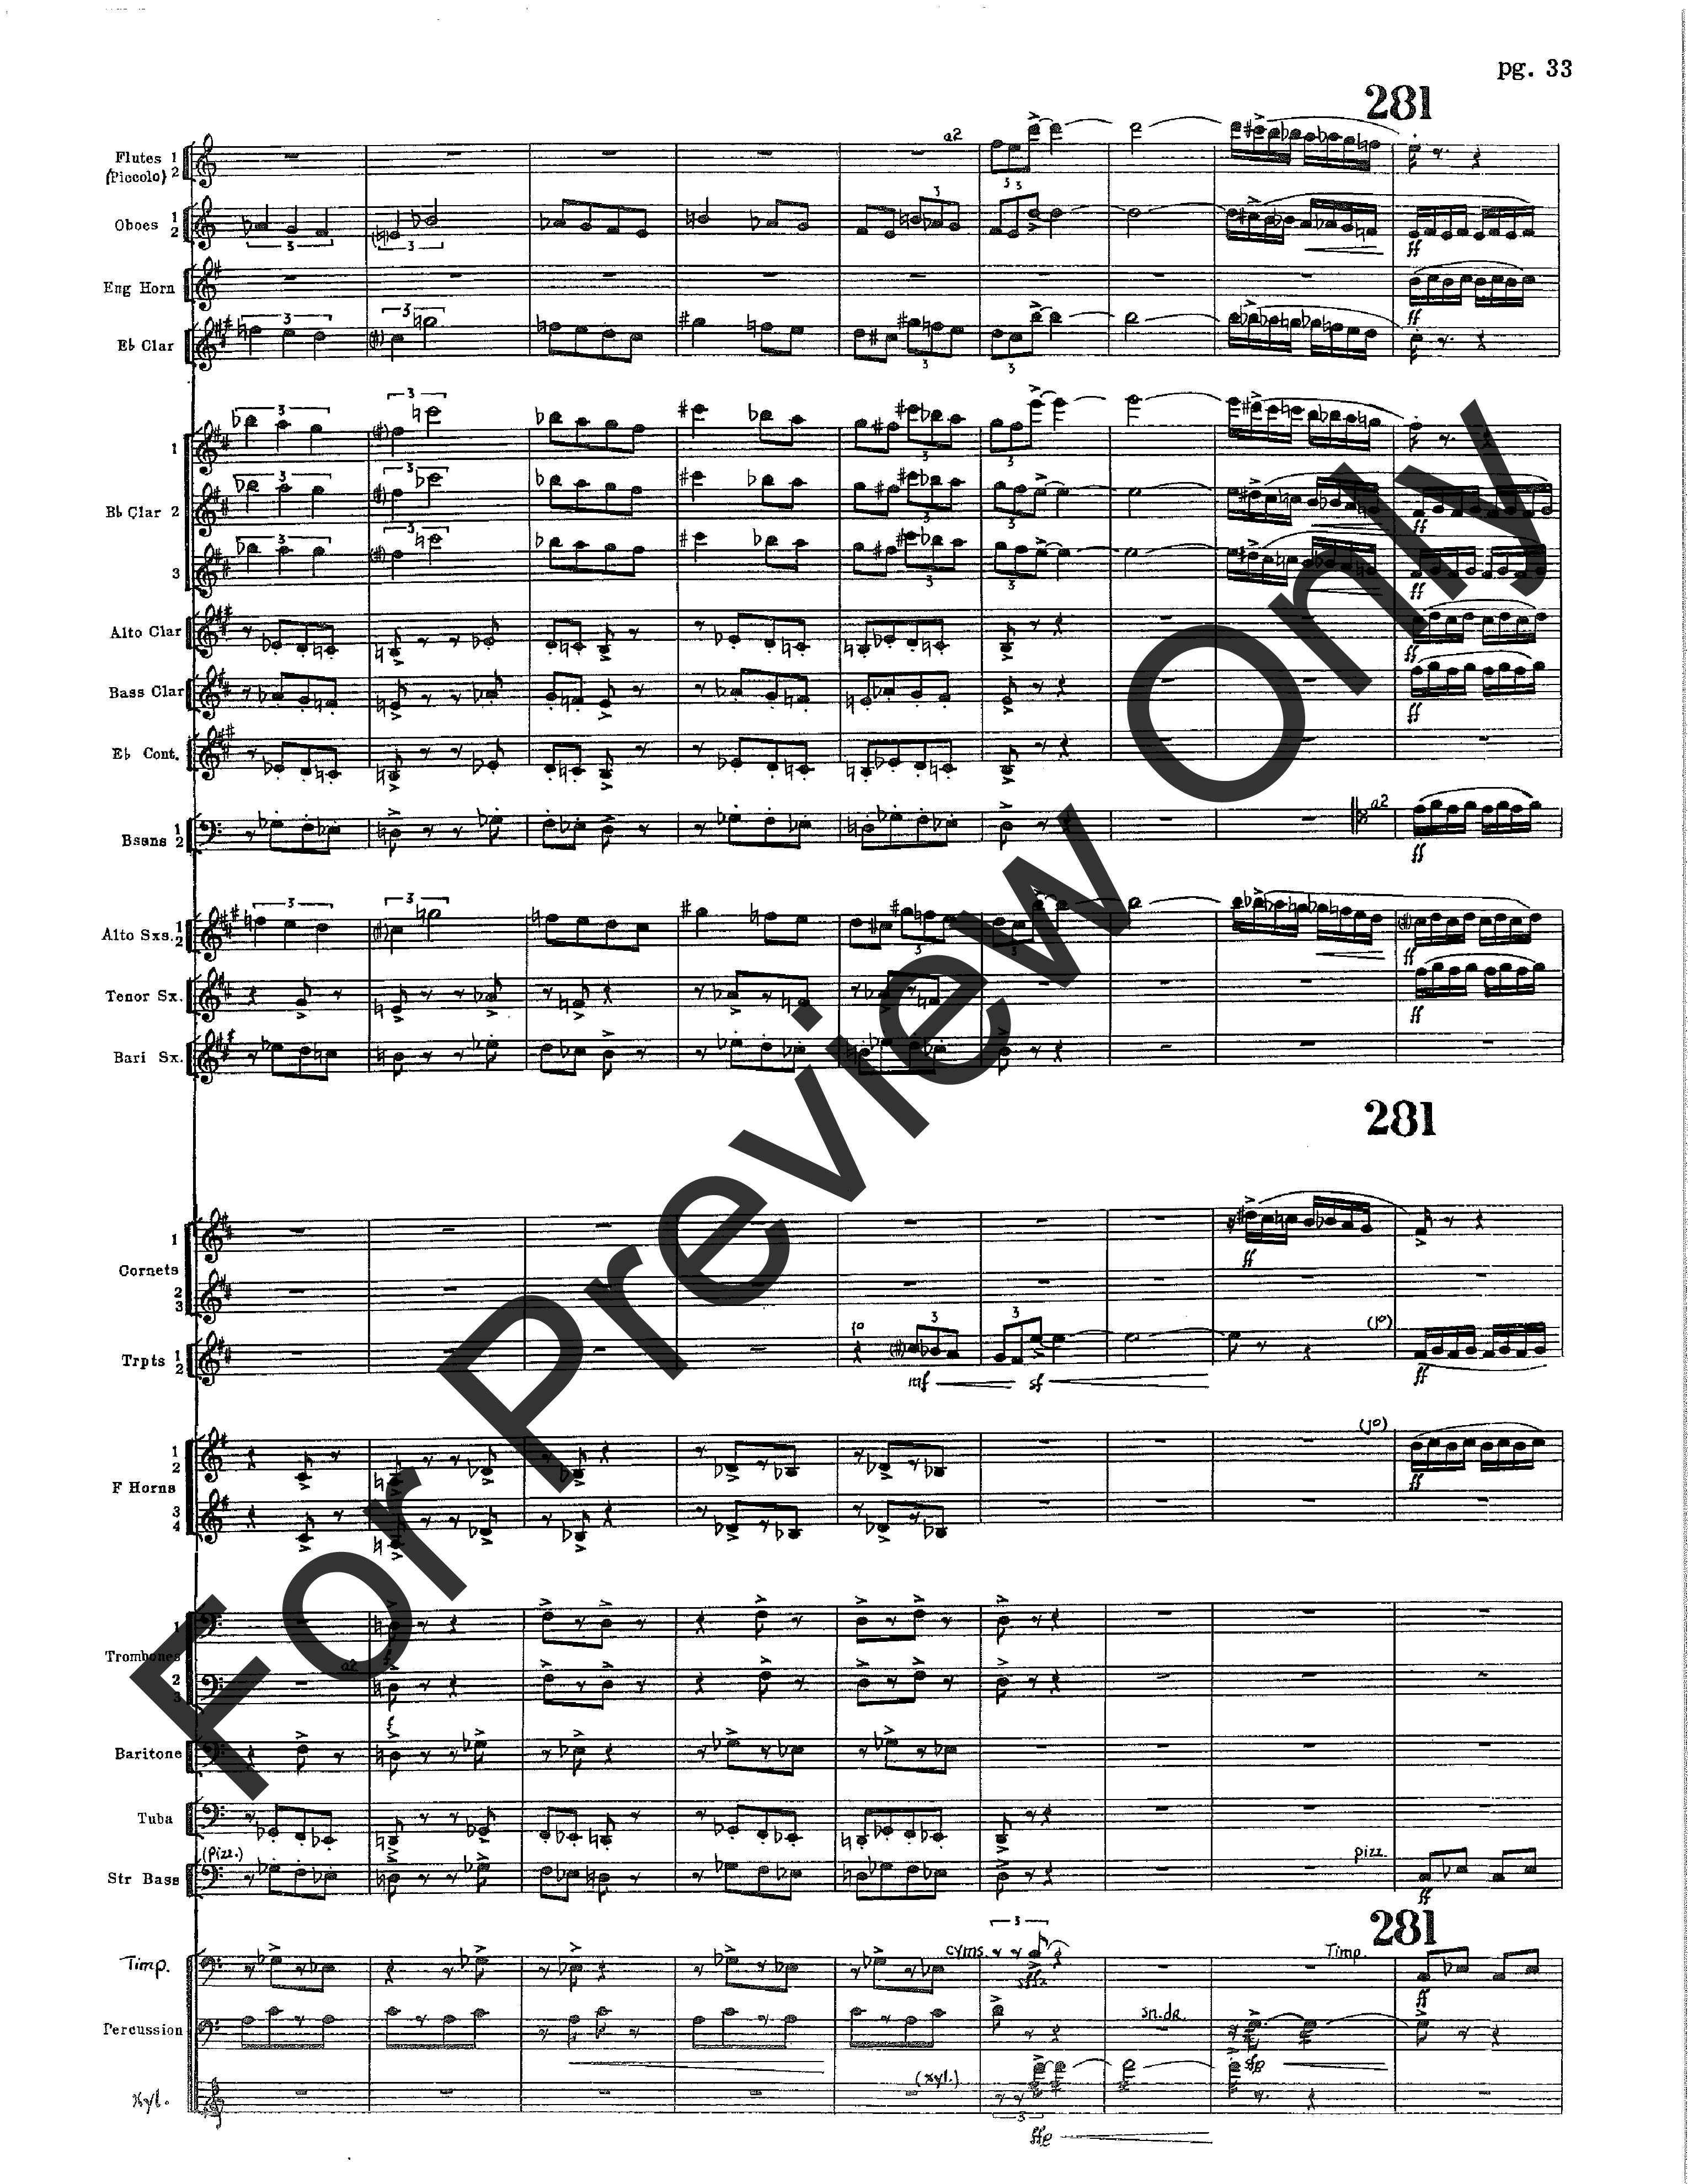 Symphony for Band